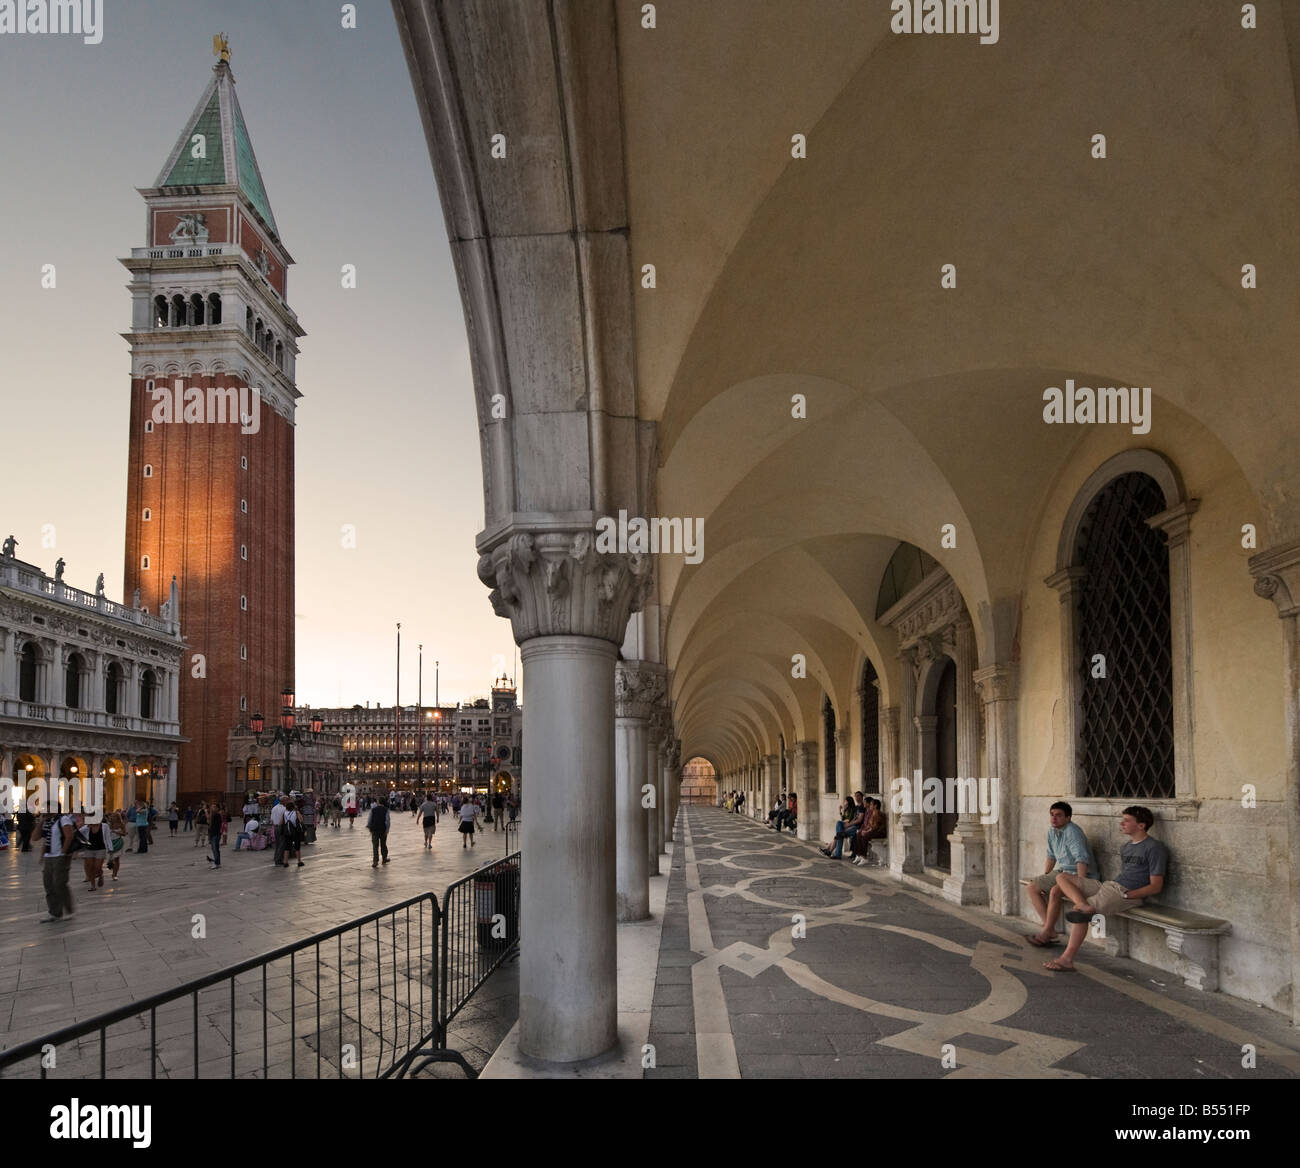 The Campanile at dusk from the arcade around the Palazzo Ducale, Piazzeta, San Marco, Venice, Veneto, Italy Stock Photo